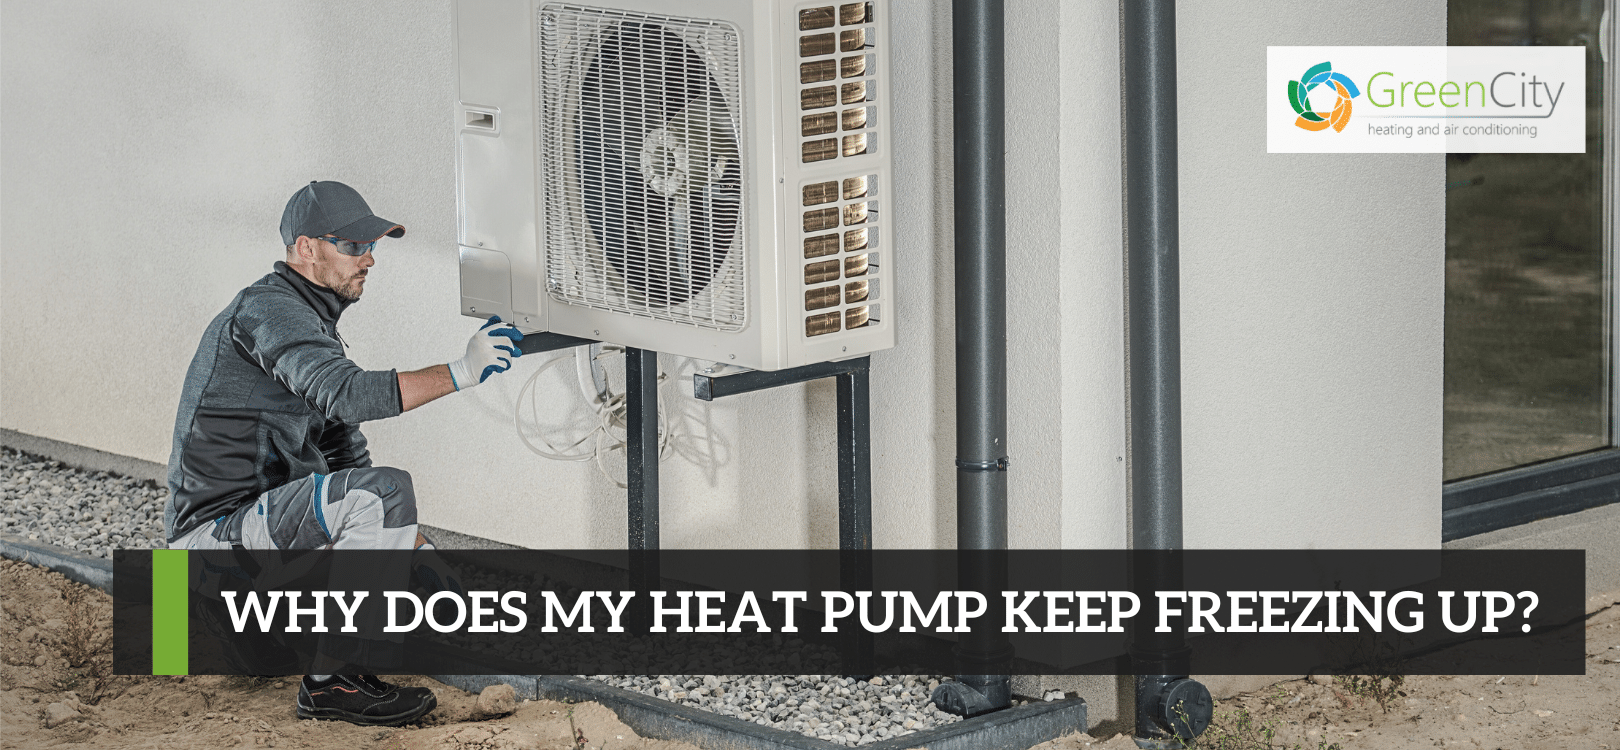 Why Does My Heat Pump Keep Freezing Up